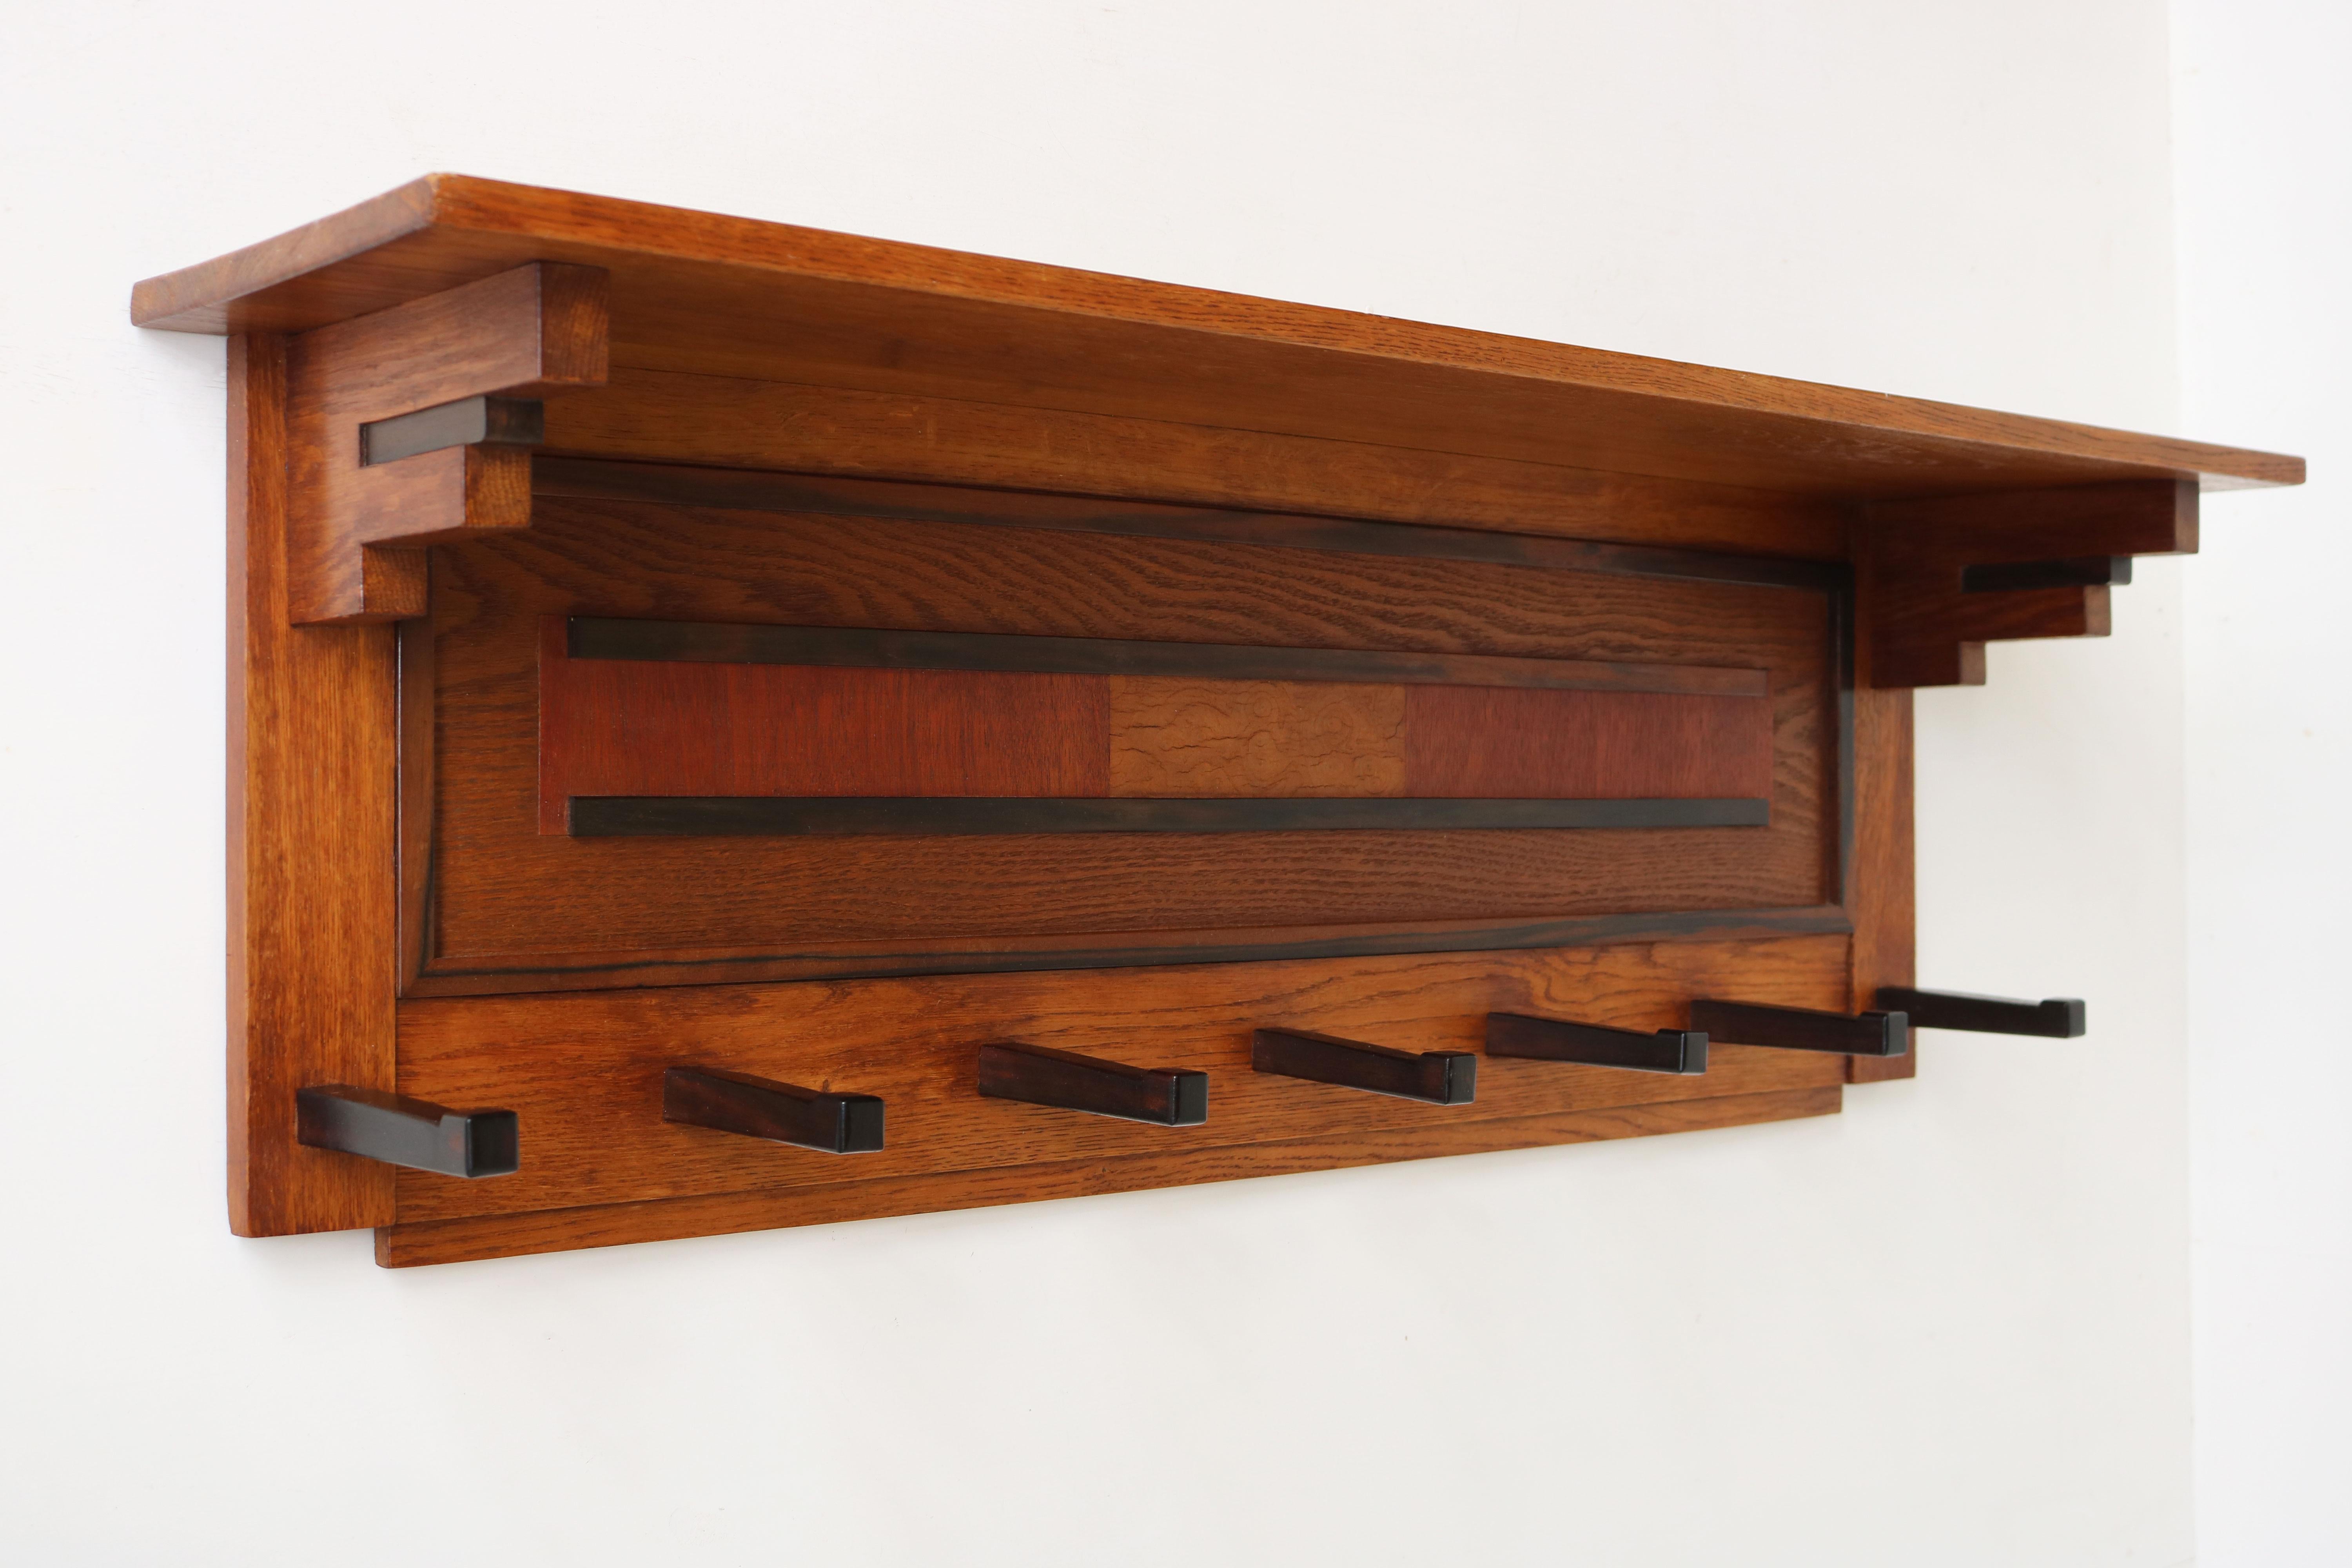 Exquisite clean Dutch Art Deco design coat rack in the Amsterdam School design style by P.E.L. Izeren for Genneper Molen 1920.
Made from European Oak with gorgeous Macassar & mahogany details.
For example the square in the coatracks centre made